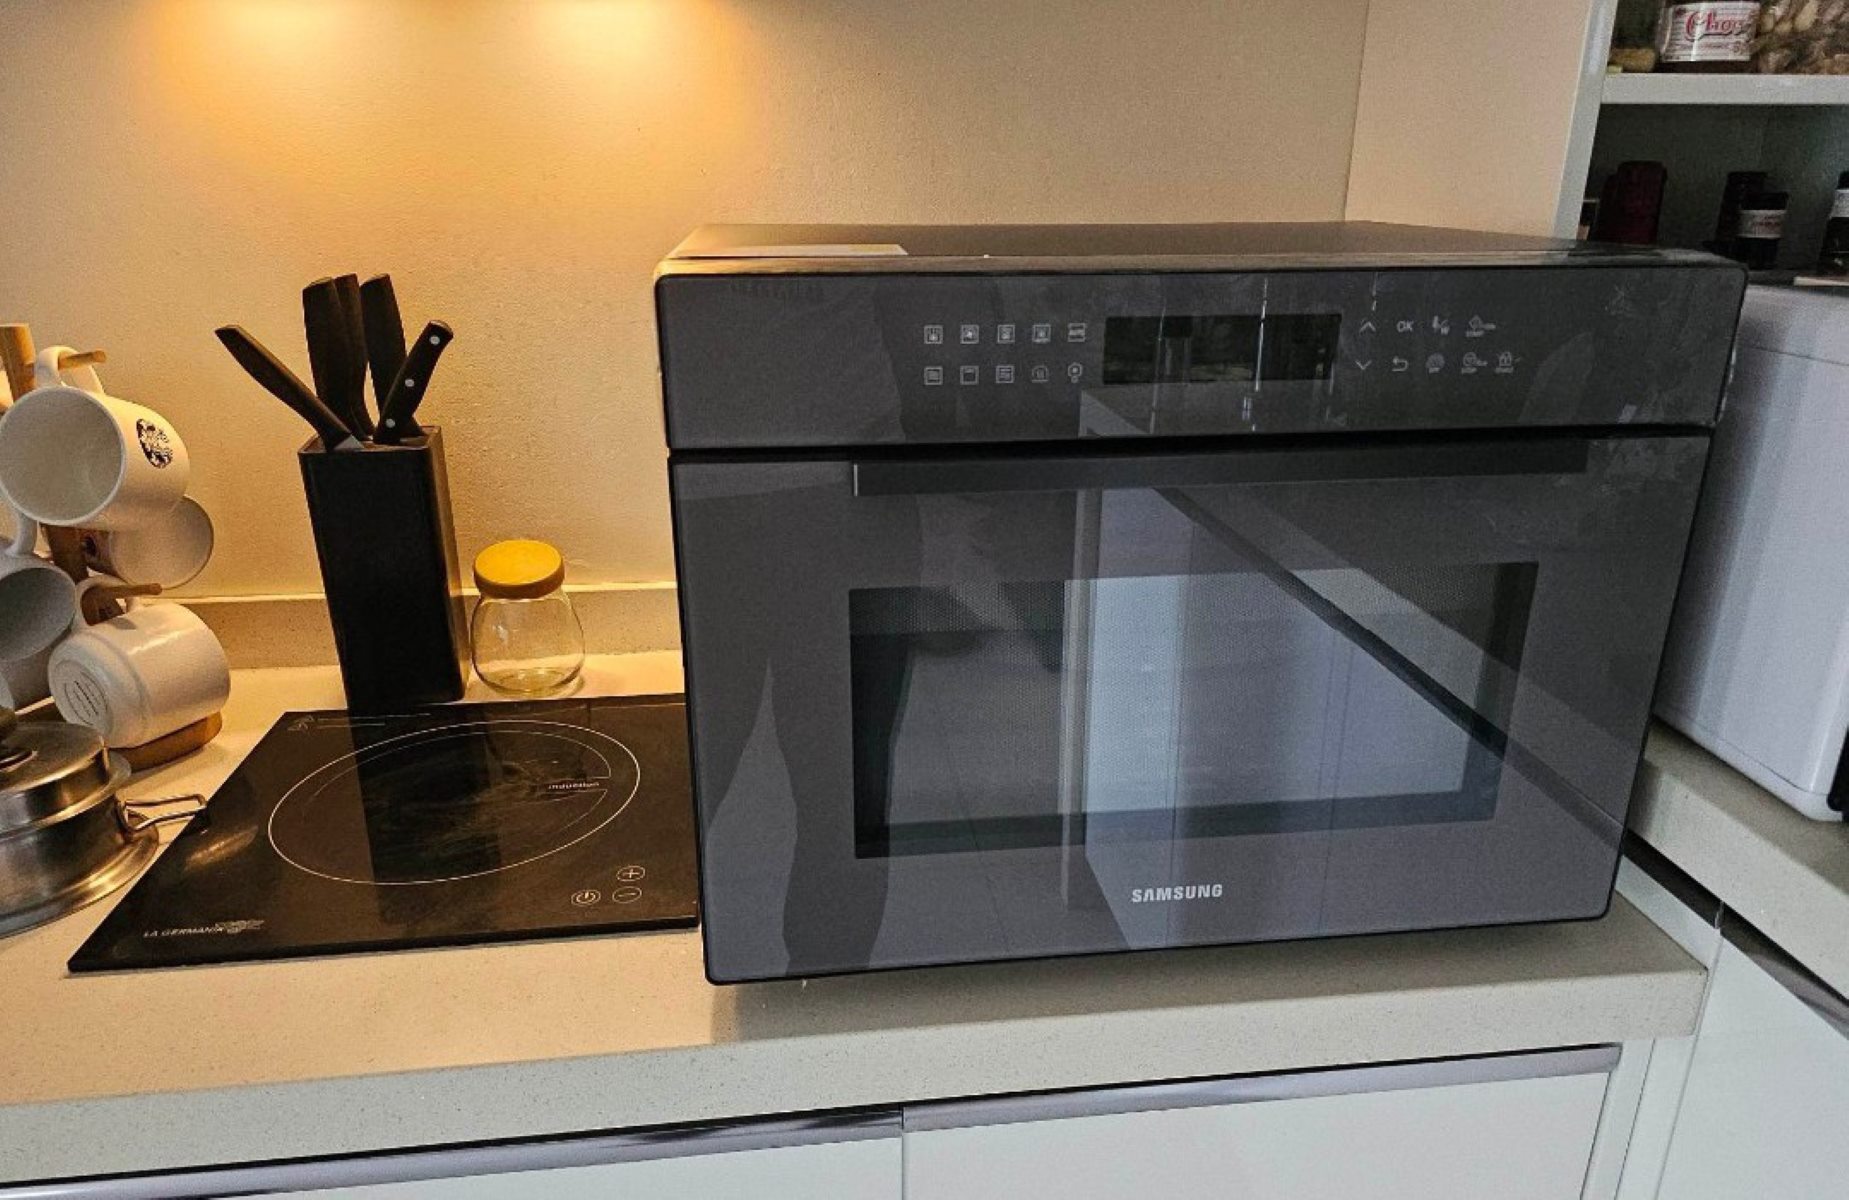 How To Fix The Error Code E-5C For Samsung Convection Oven